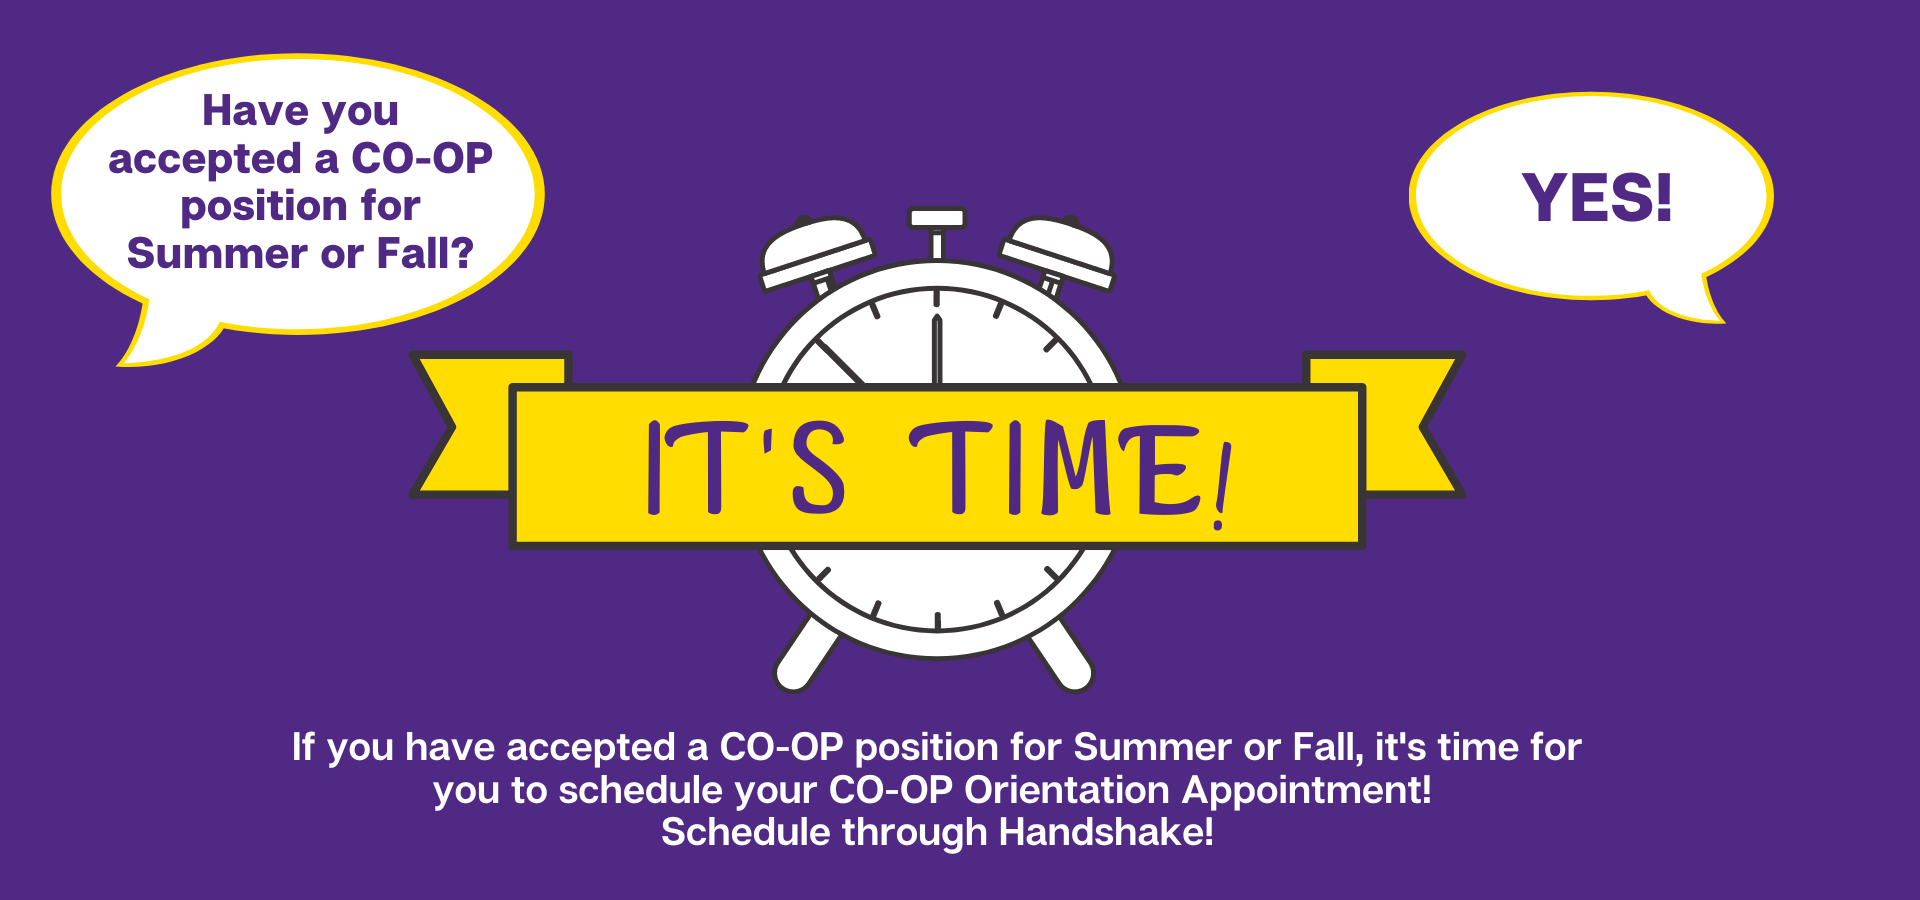 If you accepted a Co-Op position for summer or fall, it's time to schedule your orientation appointment in Handshake!